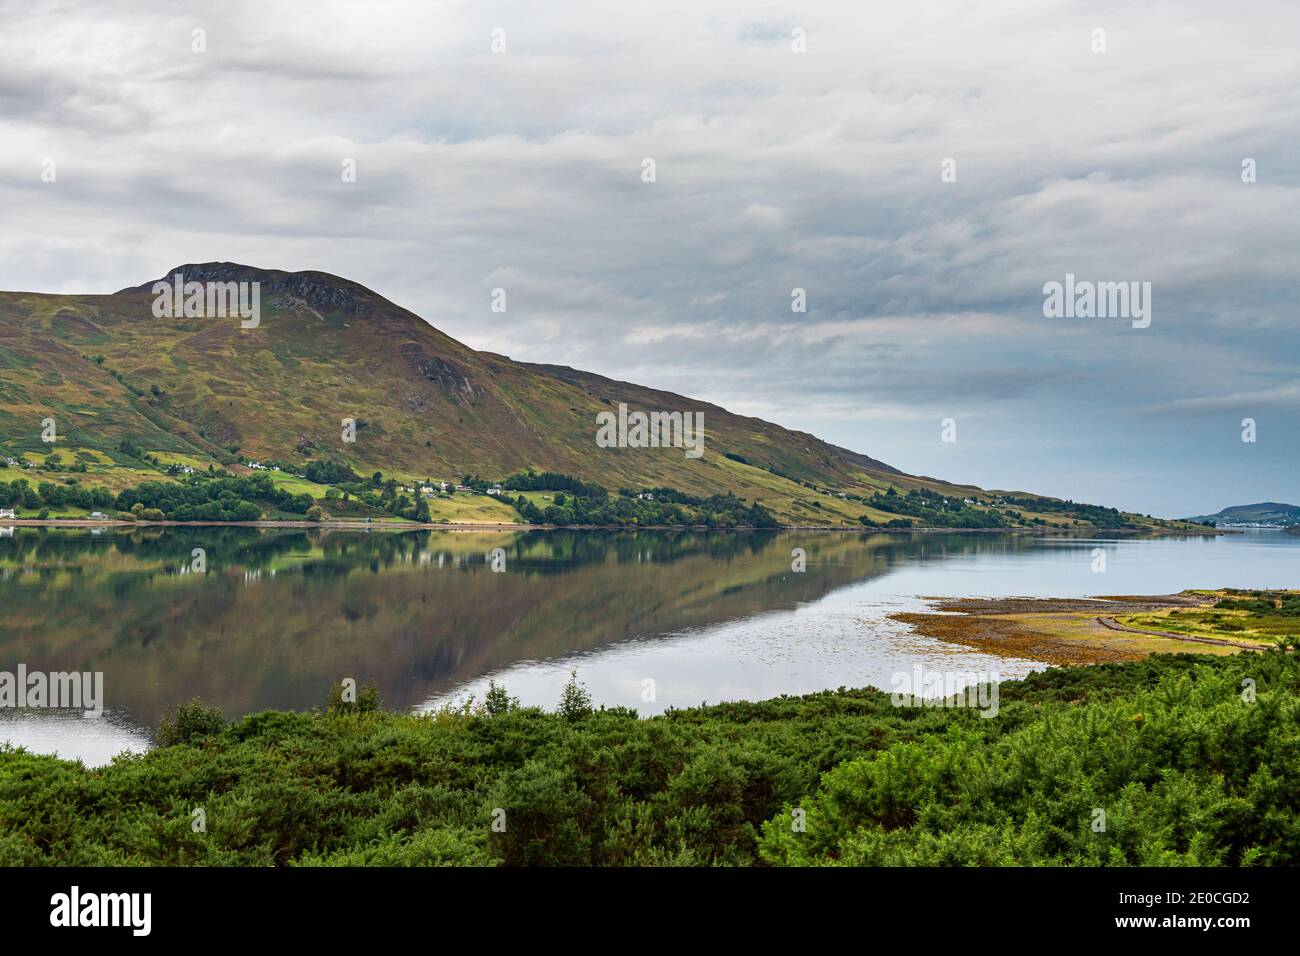 Bay of Ullapool, Ross et Cromarty, Highlands, Écosse, Royaume-Uni, Europe Banque D'Images